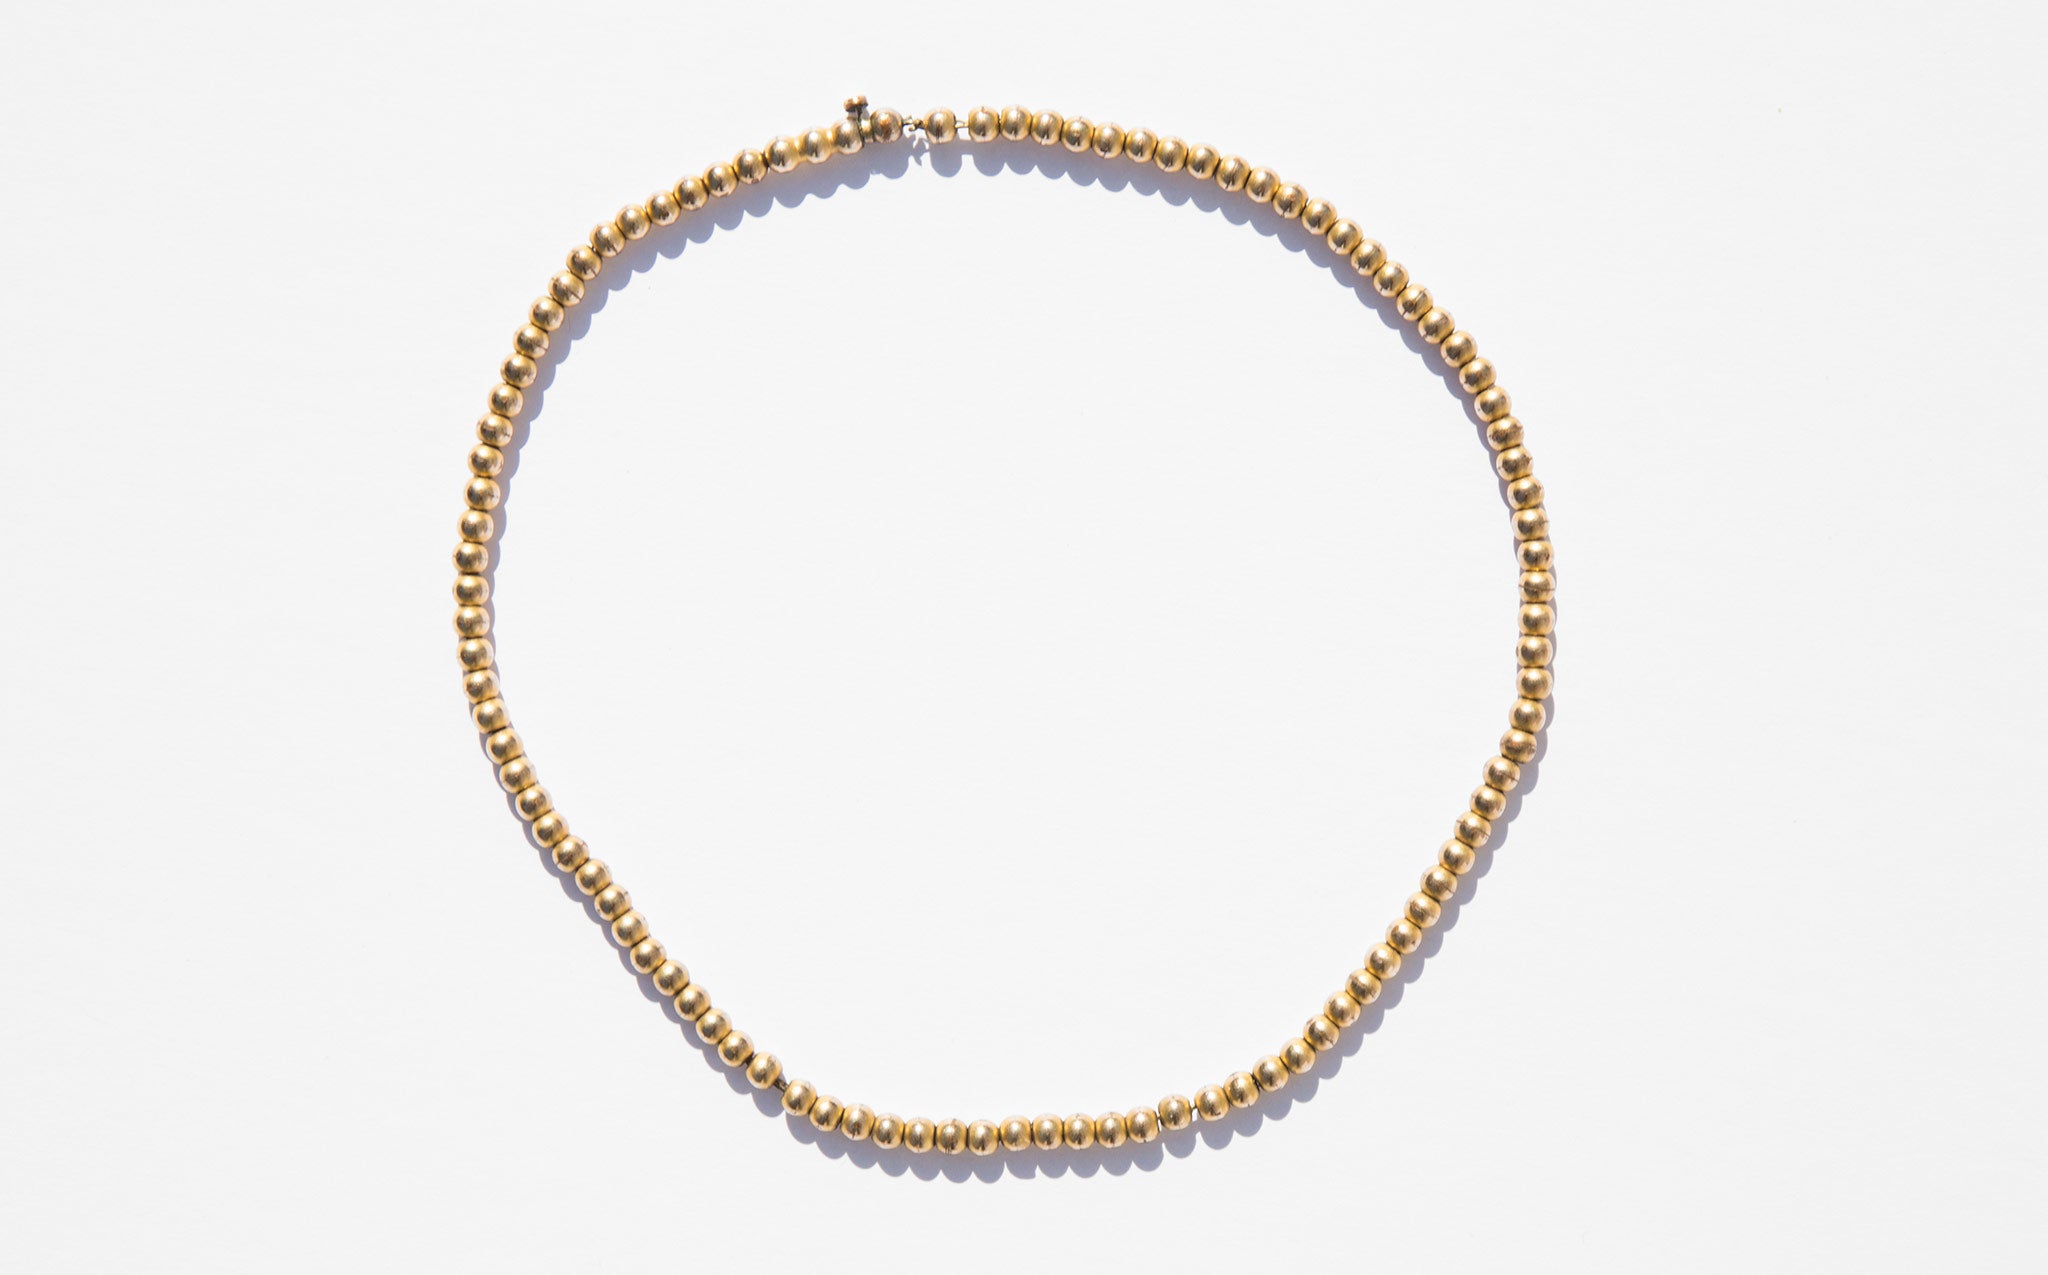 Antique Gold Pearls Choker Necklace